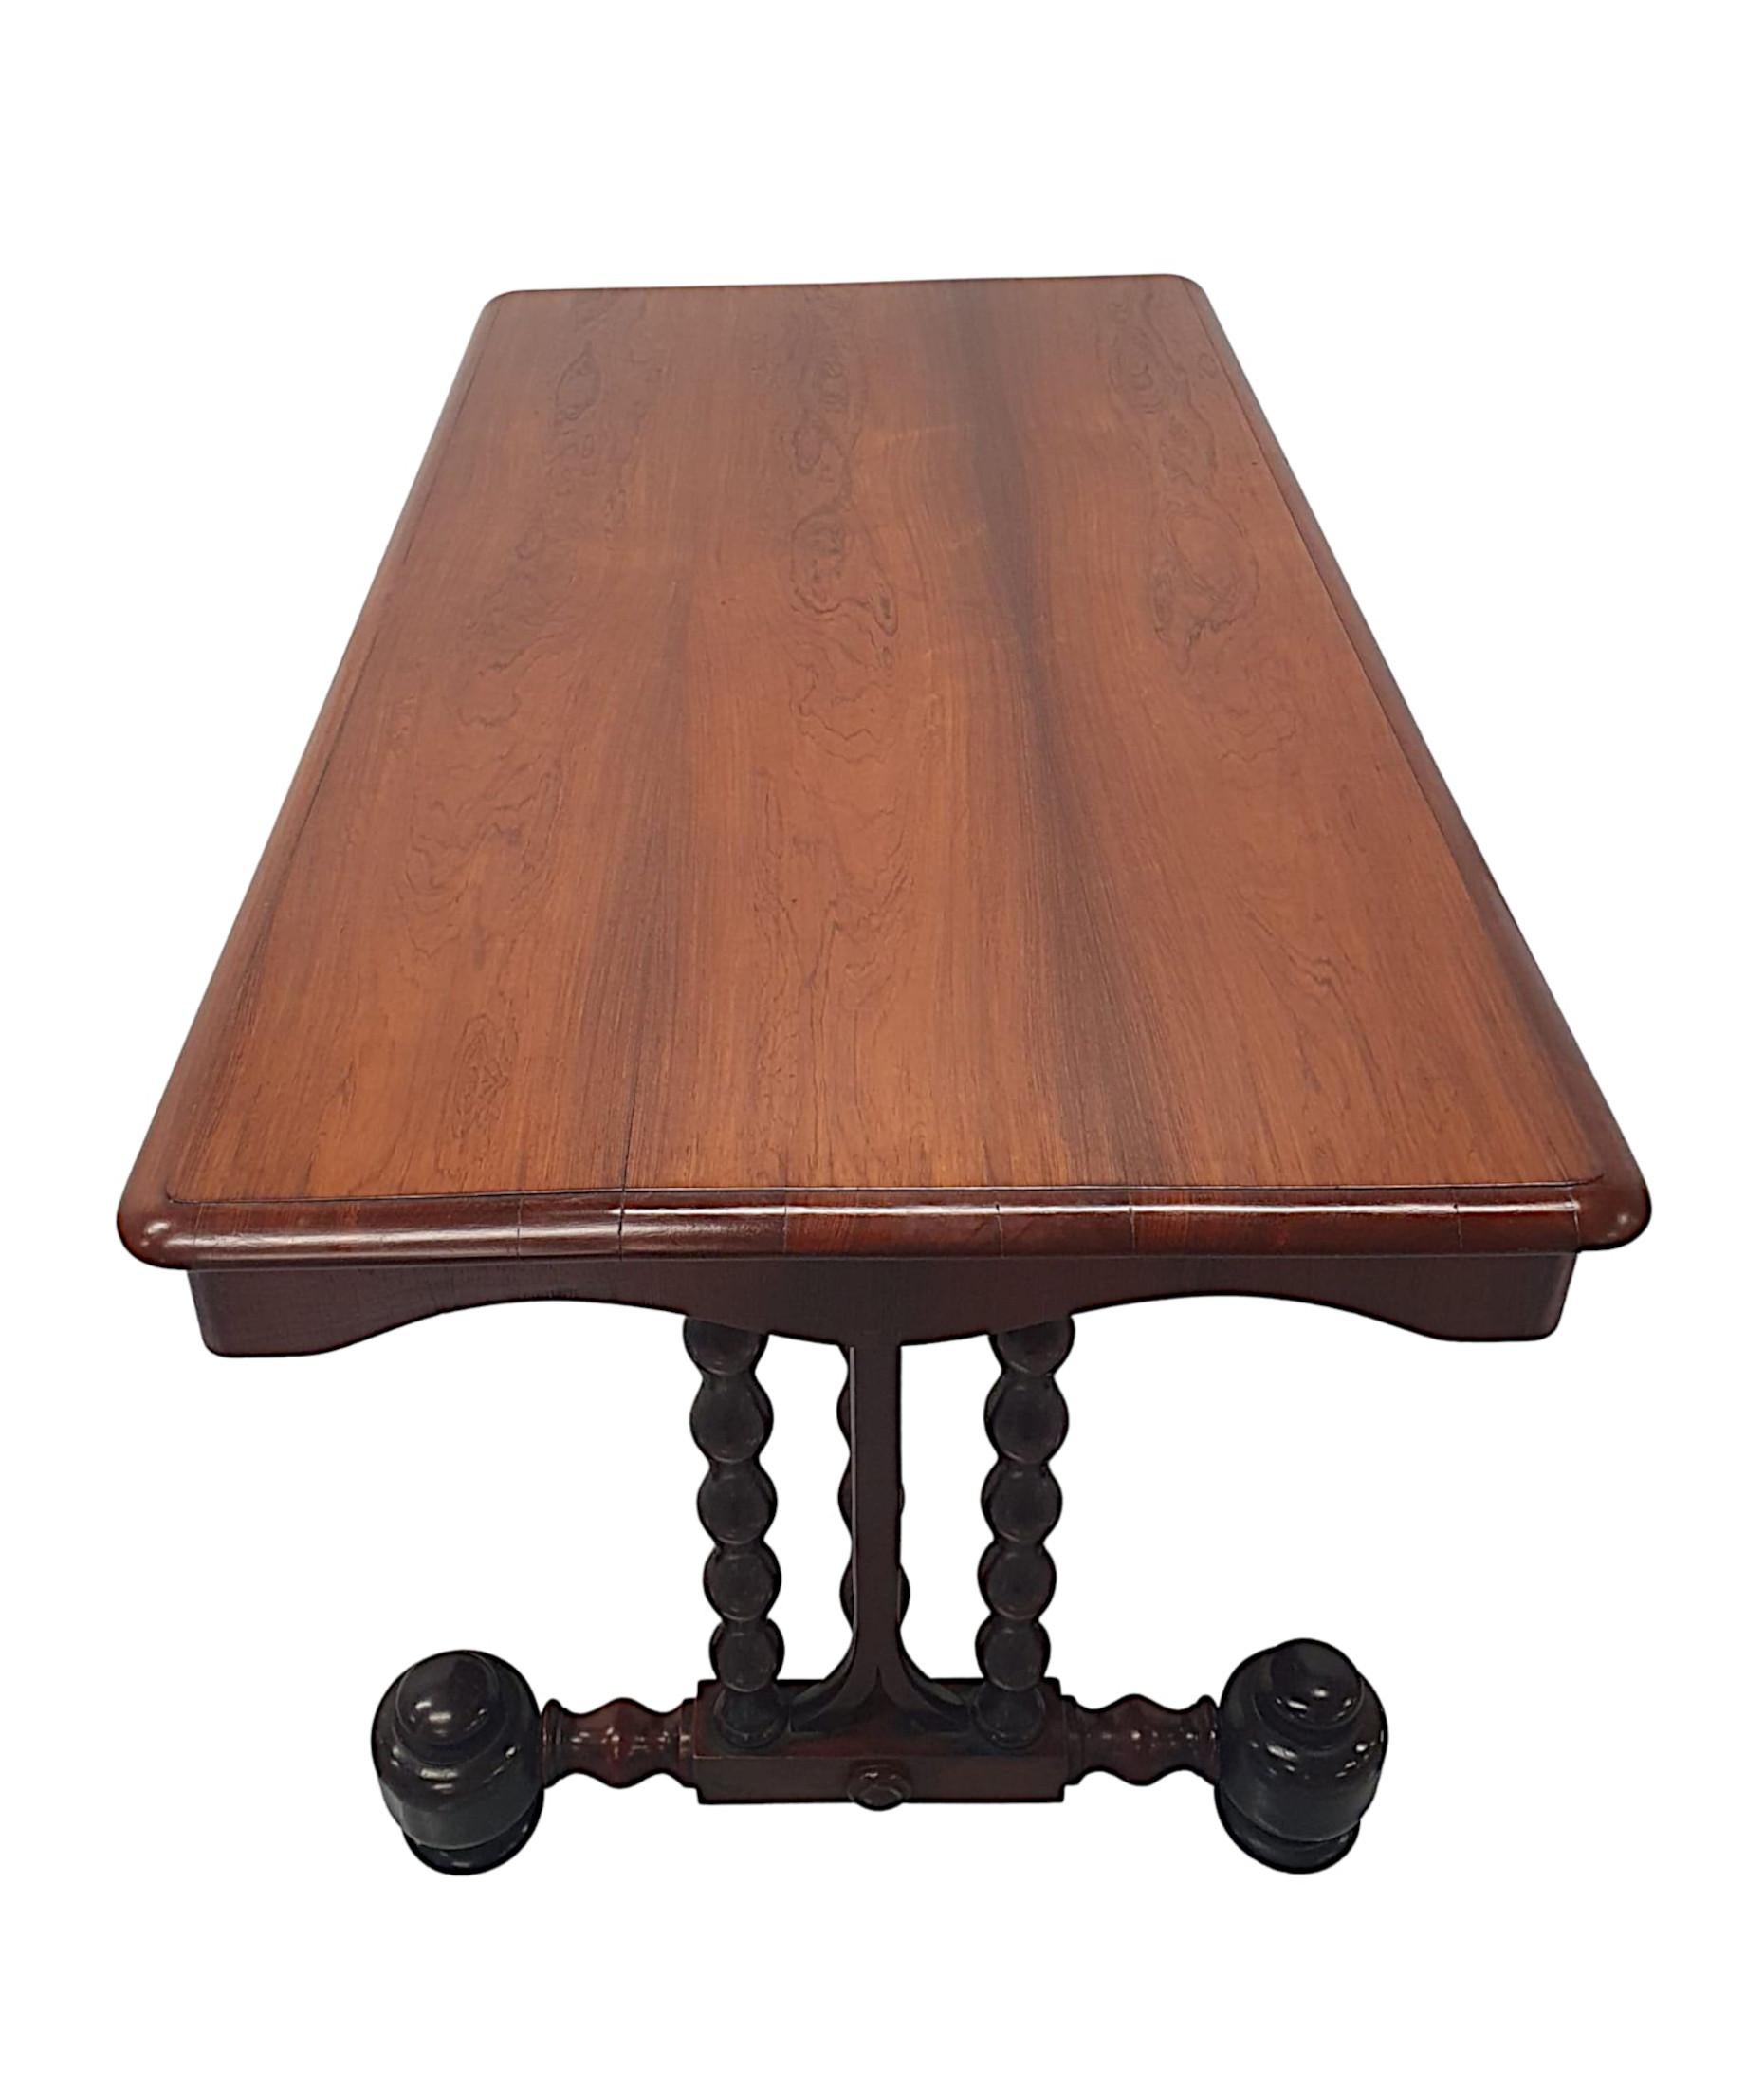 English Fabulous 19th Century Library Desk or Table For Sale